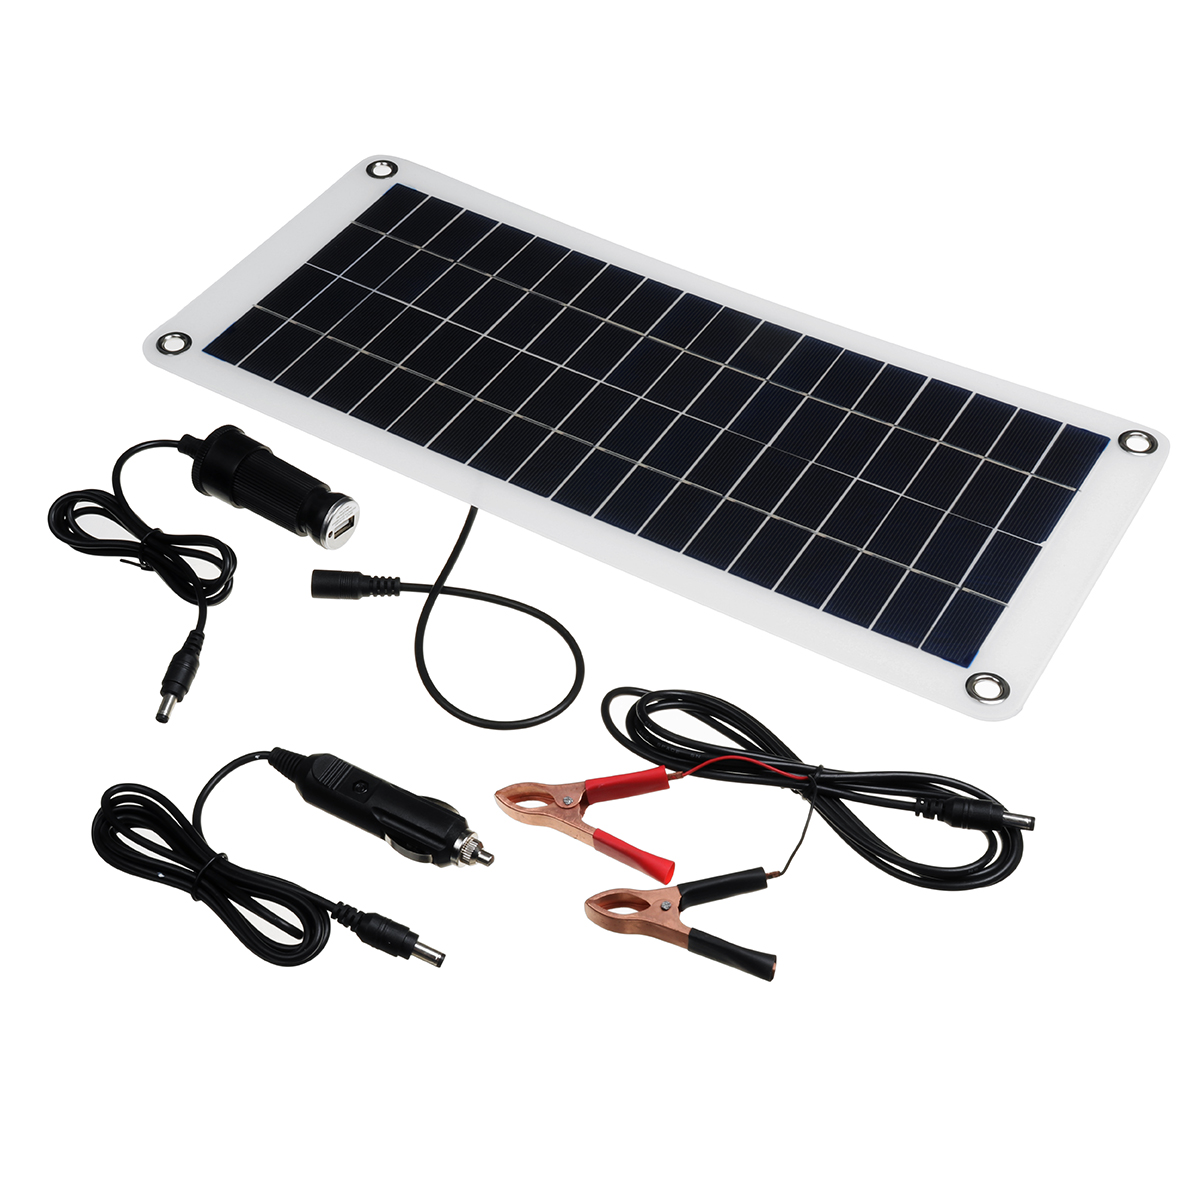 

12W 18V Polysilicon Home Solar Power Panel Kits Battery Charger Charging